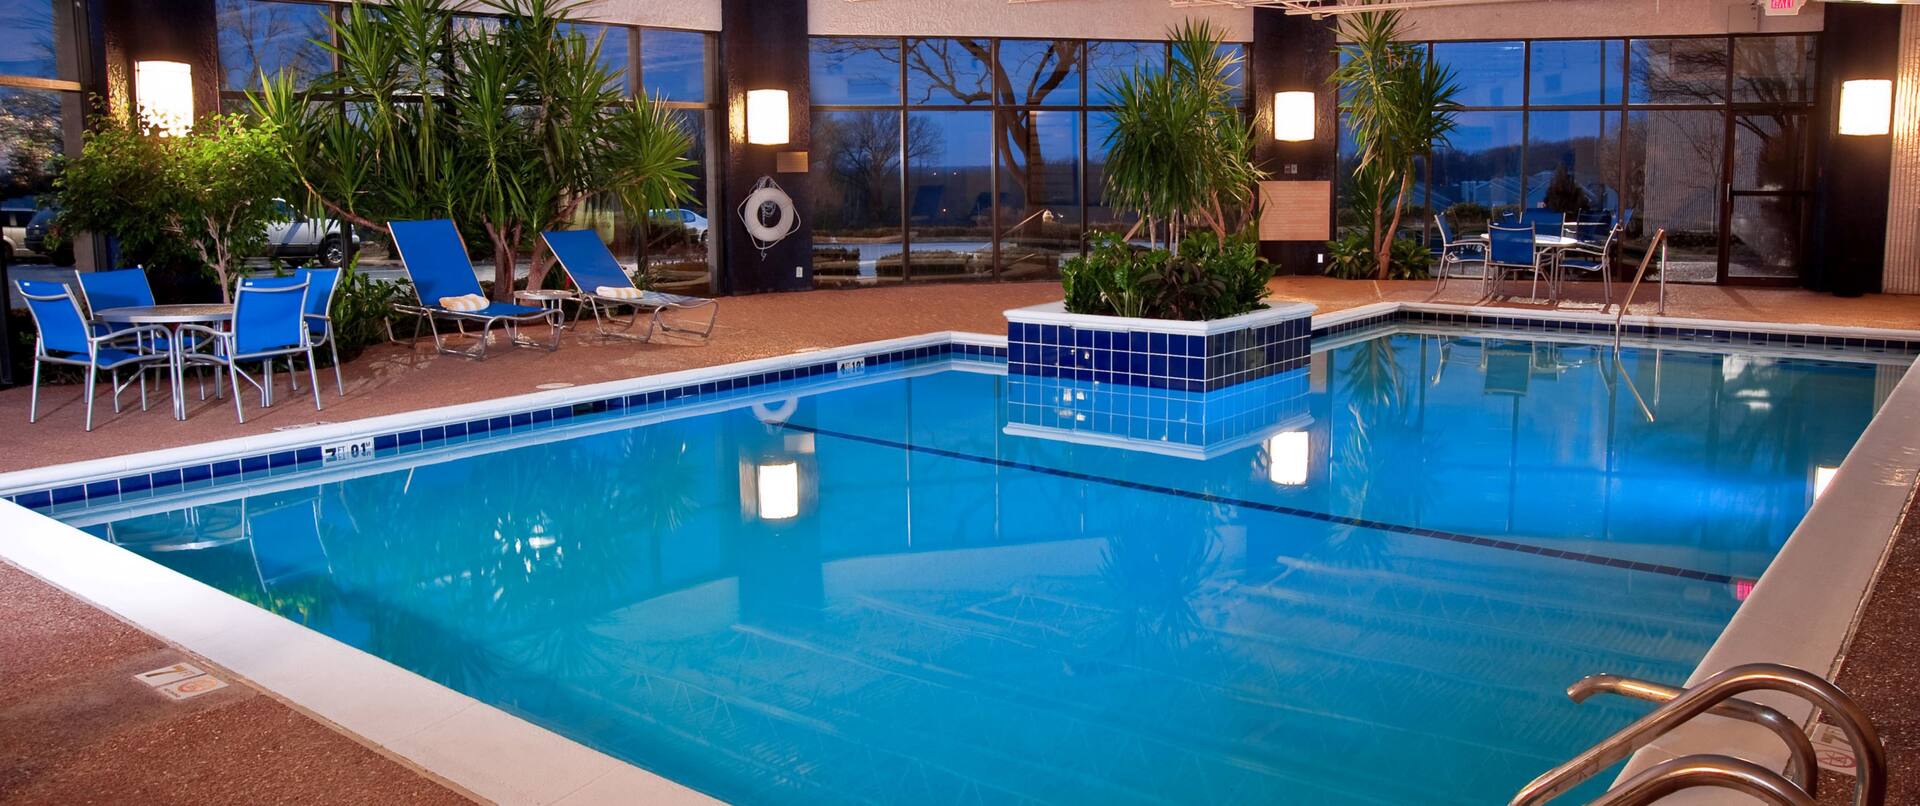 Indoor Pool with seating area